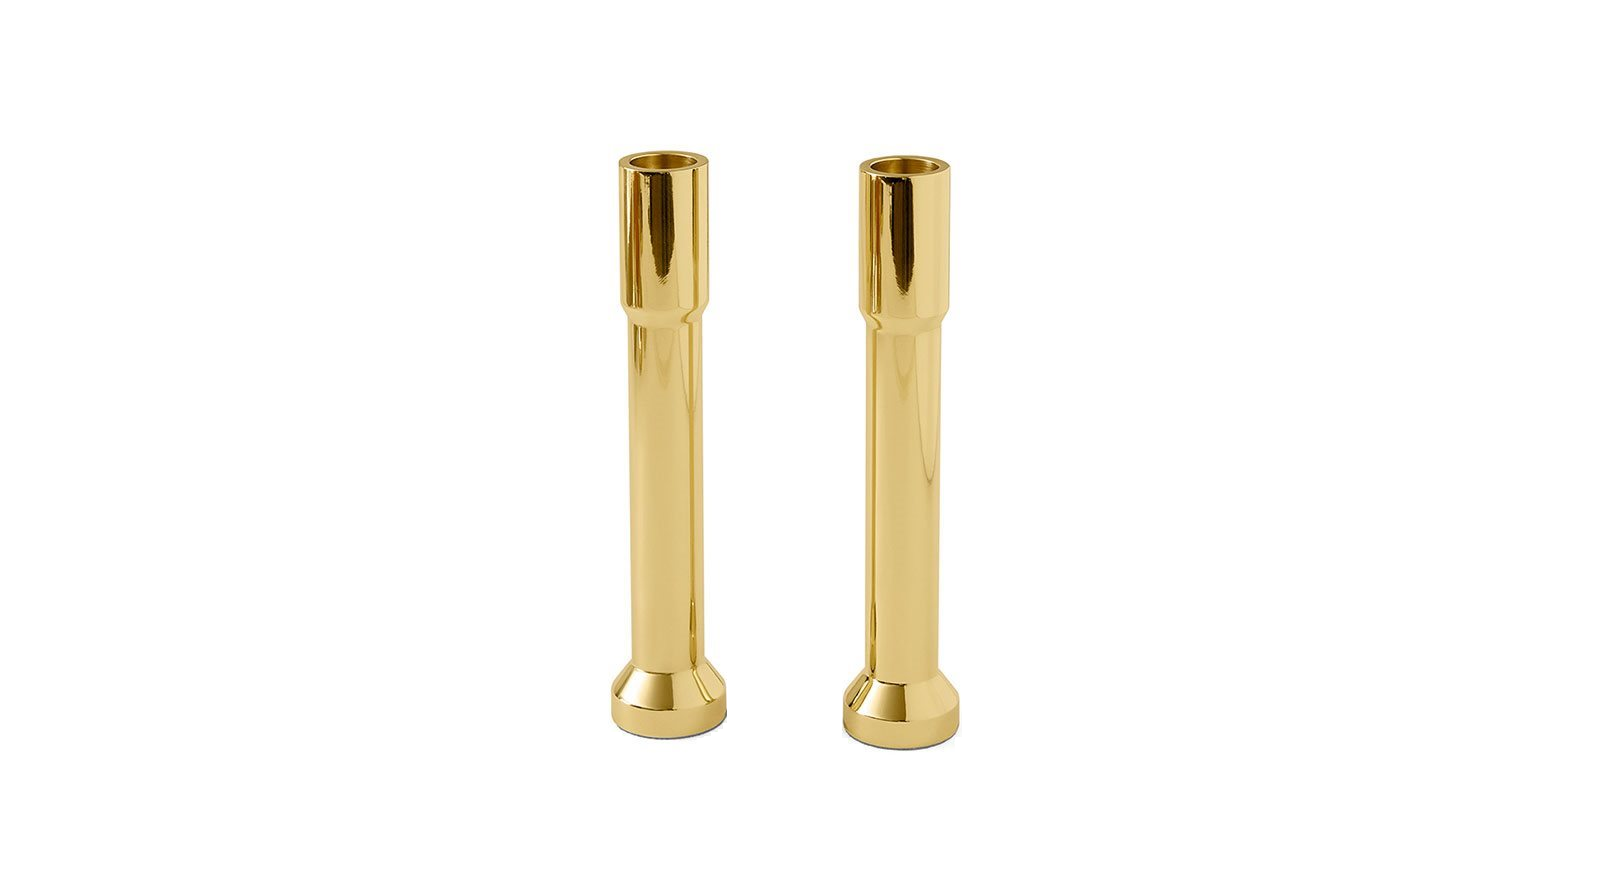 Gallotti & Radice candle holders.png